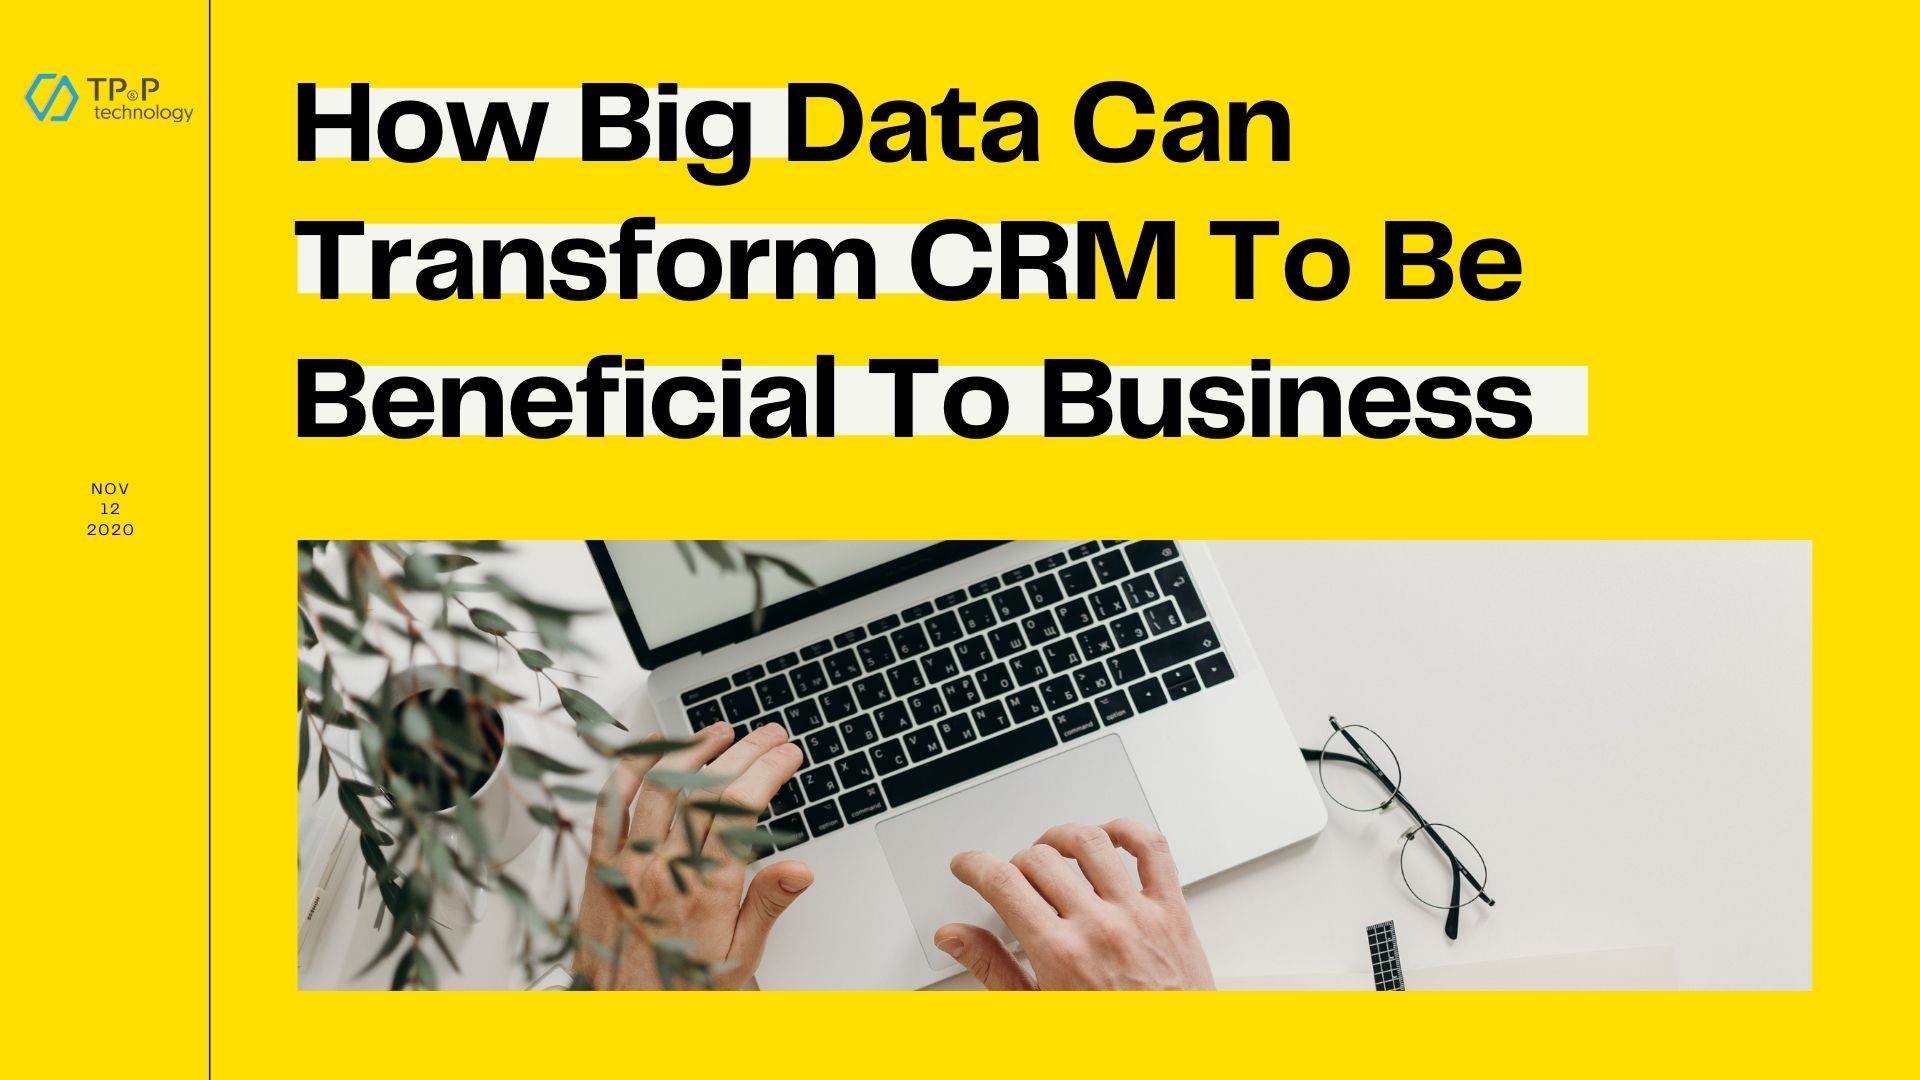 How Big Data Can Transform CRM To Be Beneficial To Business